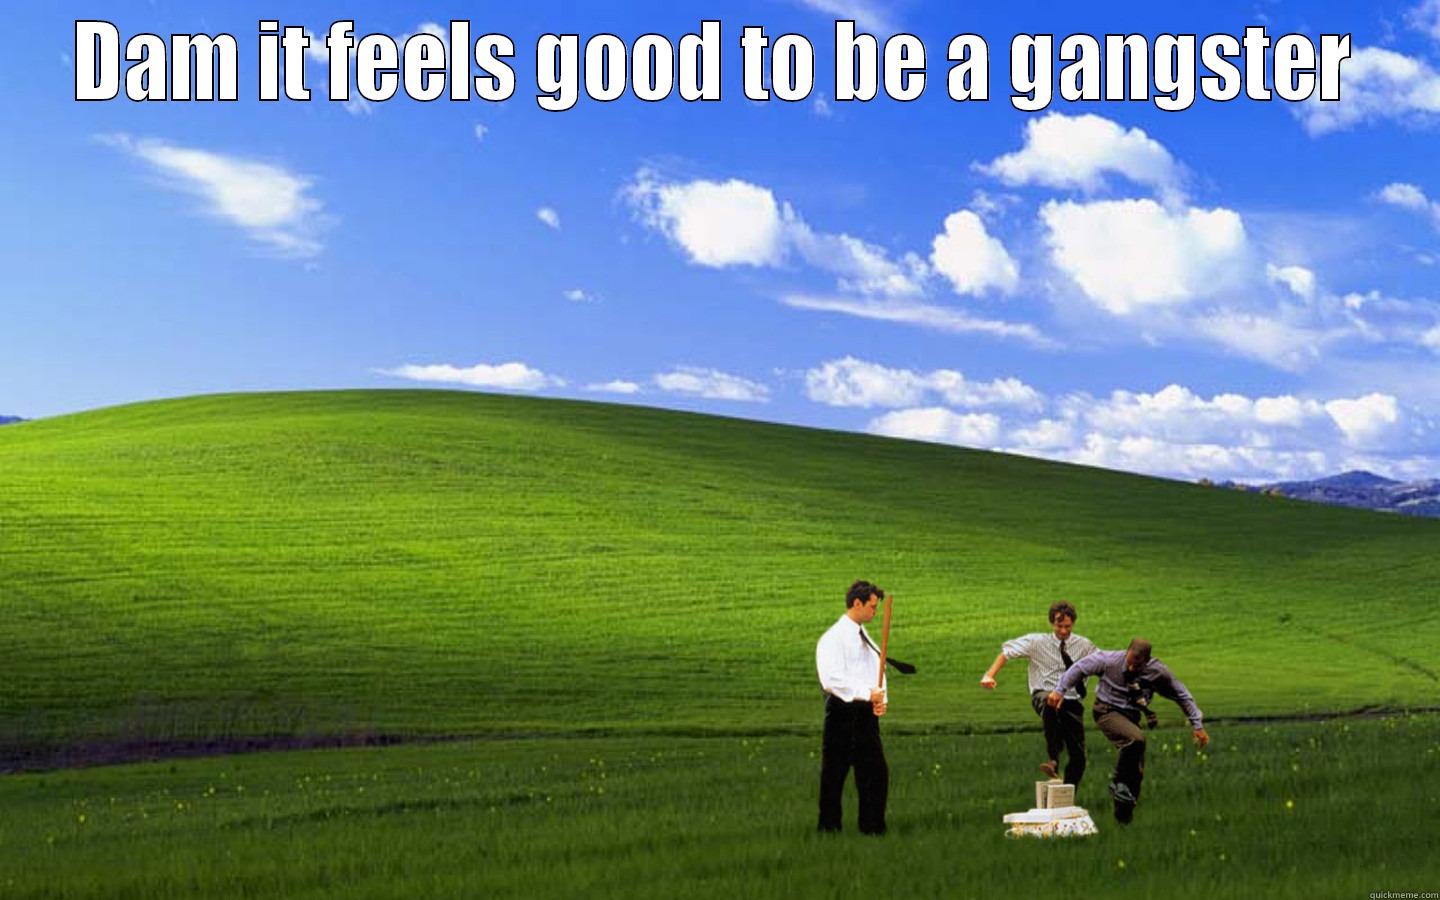 Office Space - DAM IT FEELS GOOD TO BE A GANGSTER  Misc